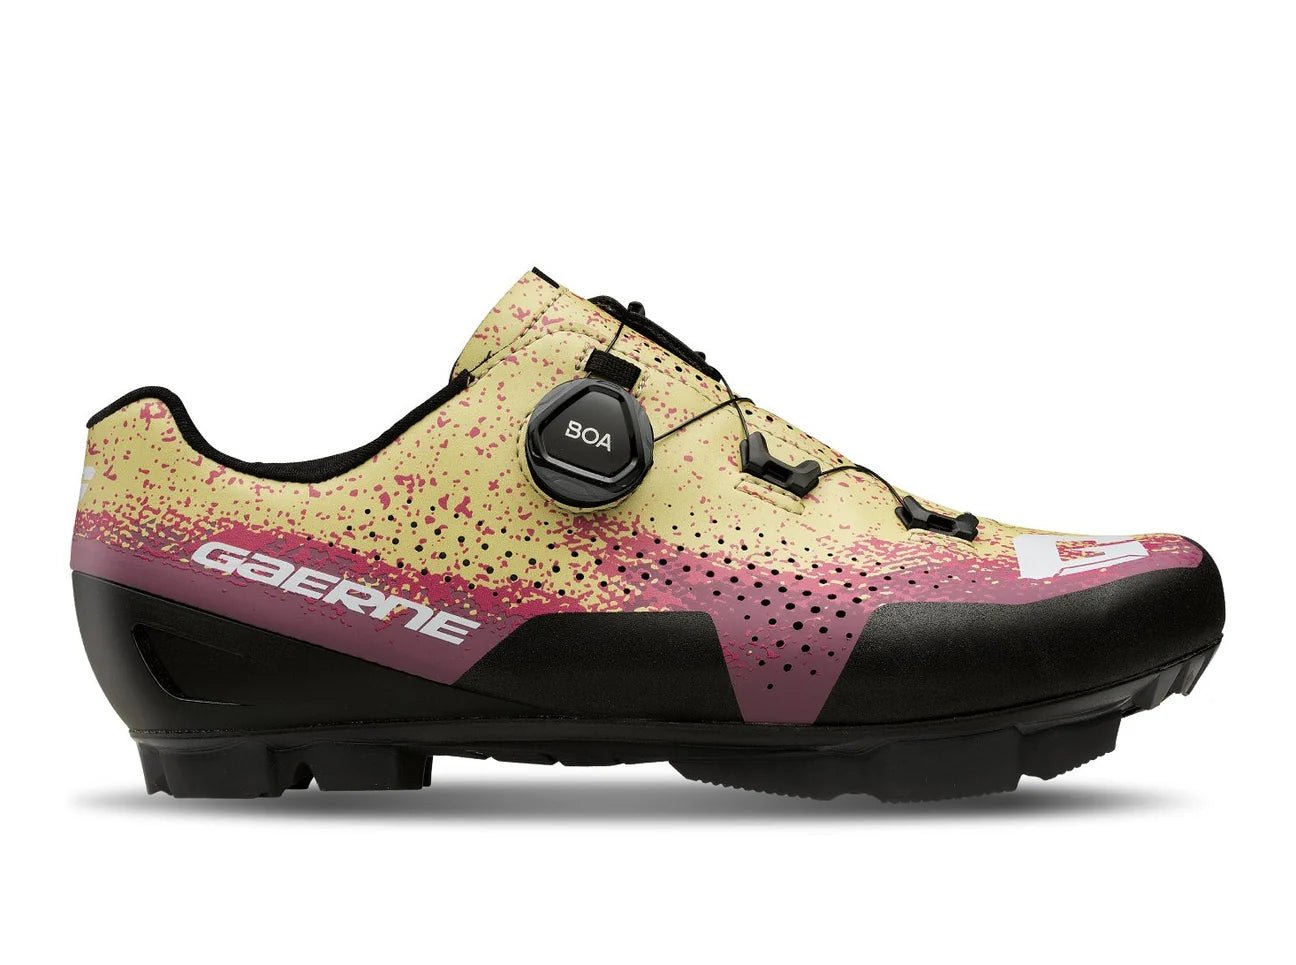 GAERNE G.LAMPO MTB Shoes